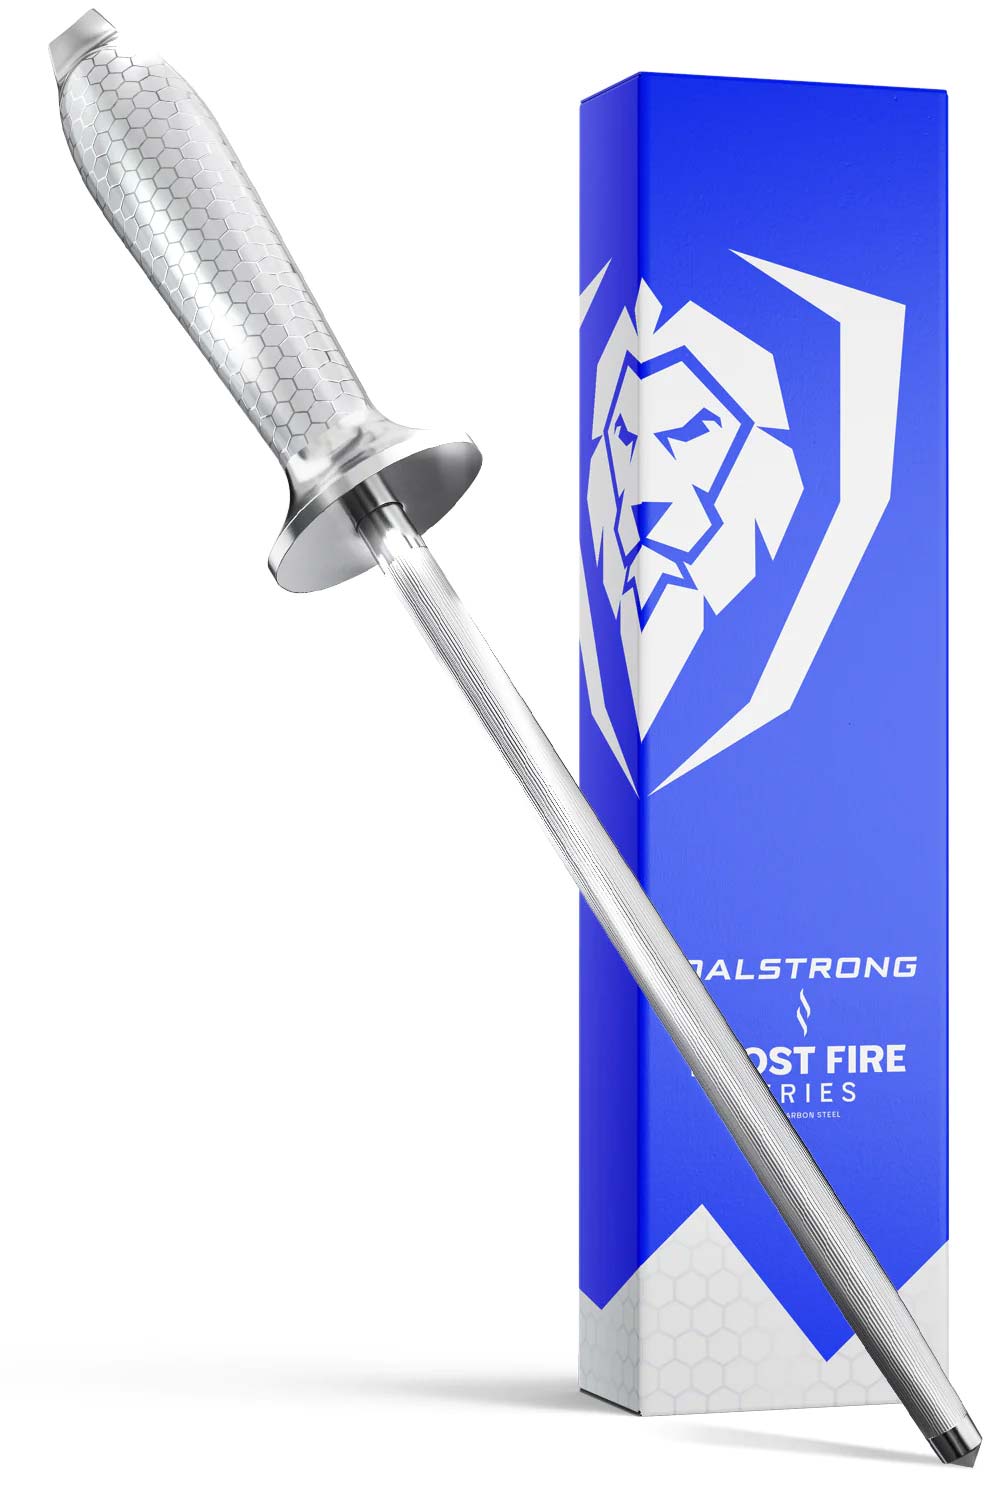 Honing Rod 10" | Frost Fire Series | NSF Certified | Dalstrong ©